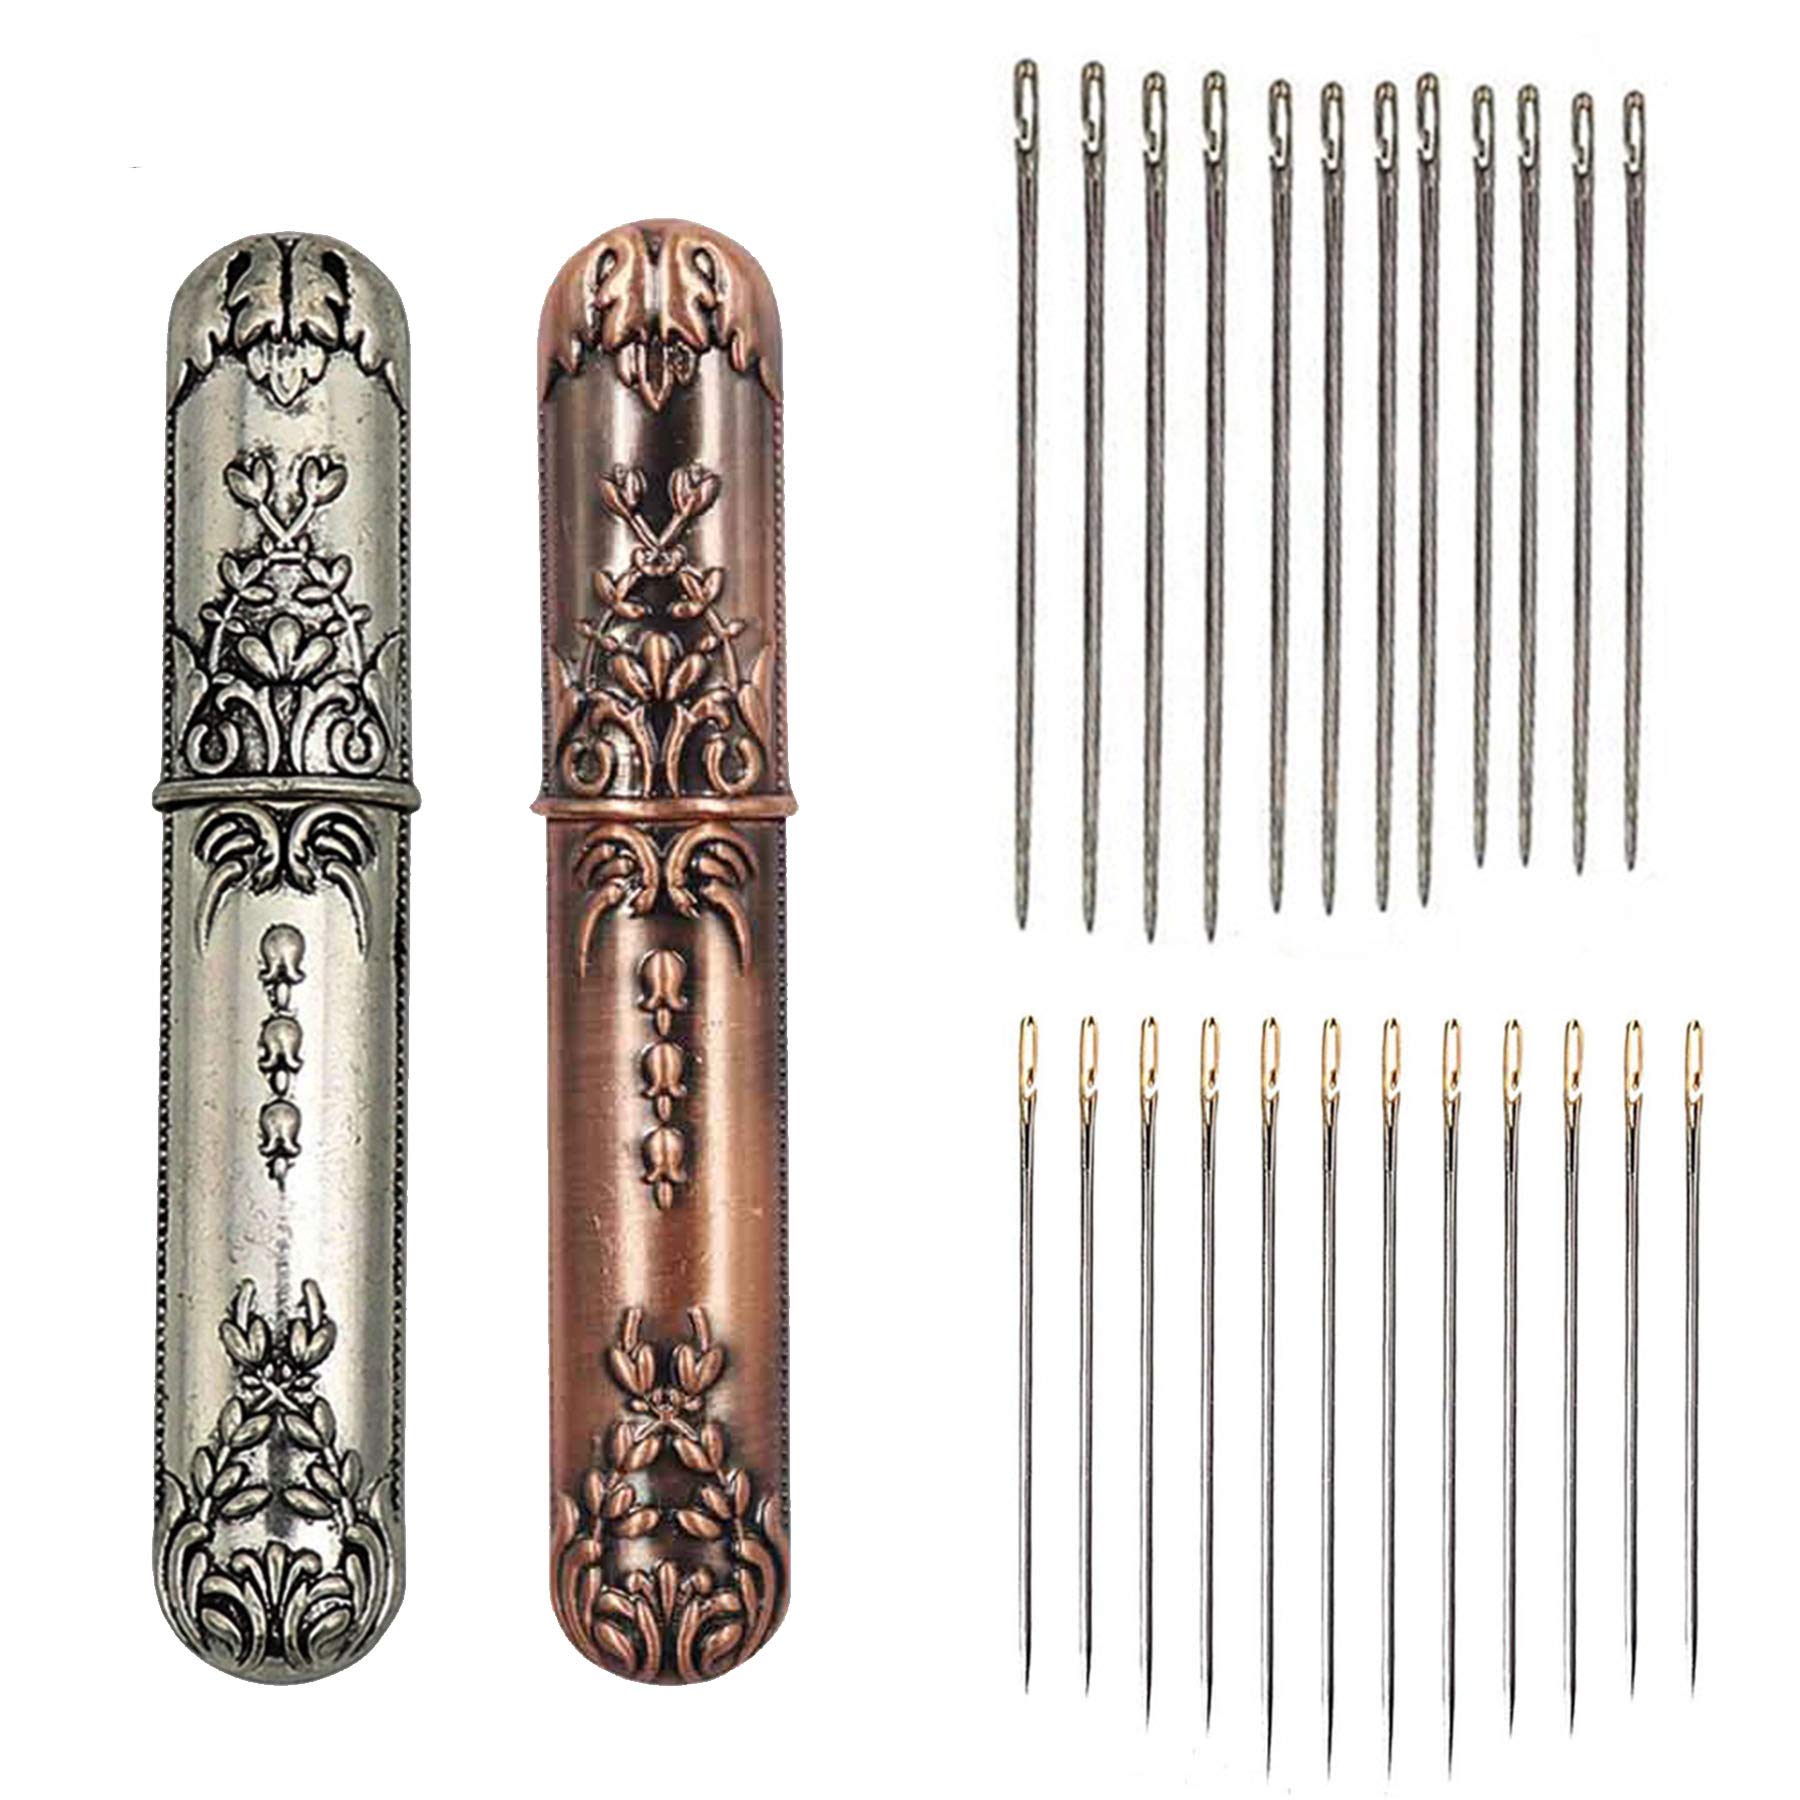 2 Pieces Vintage Needle Case Convenient Needle Storage Sewing Supplies with  24 Pcs Self-Threading Needles for Storing Handmade Sewing Embroidery Needle  Accessories COPPER + SILVER MEDIUM